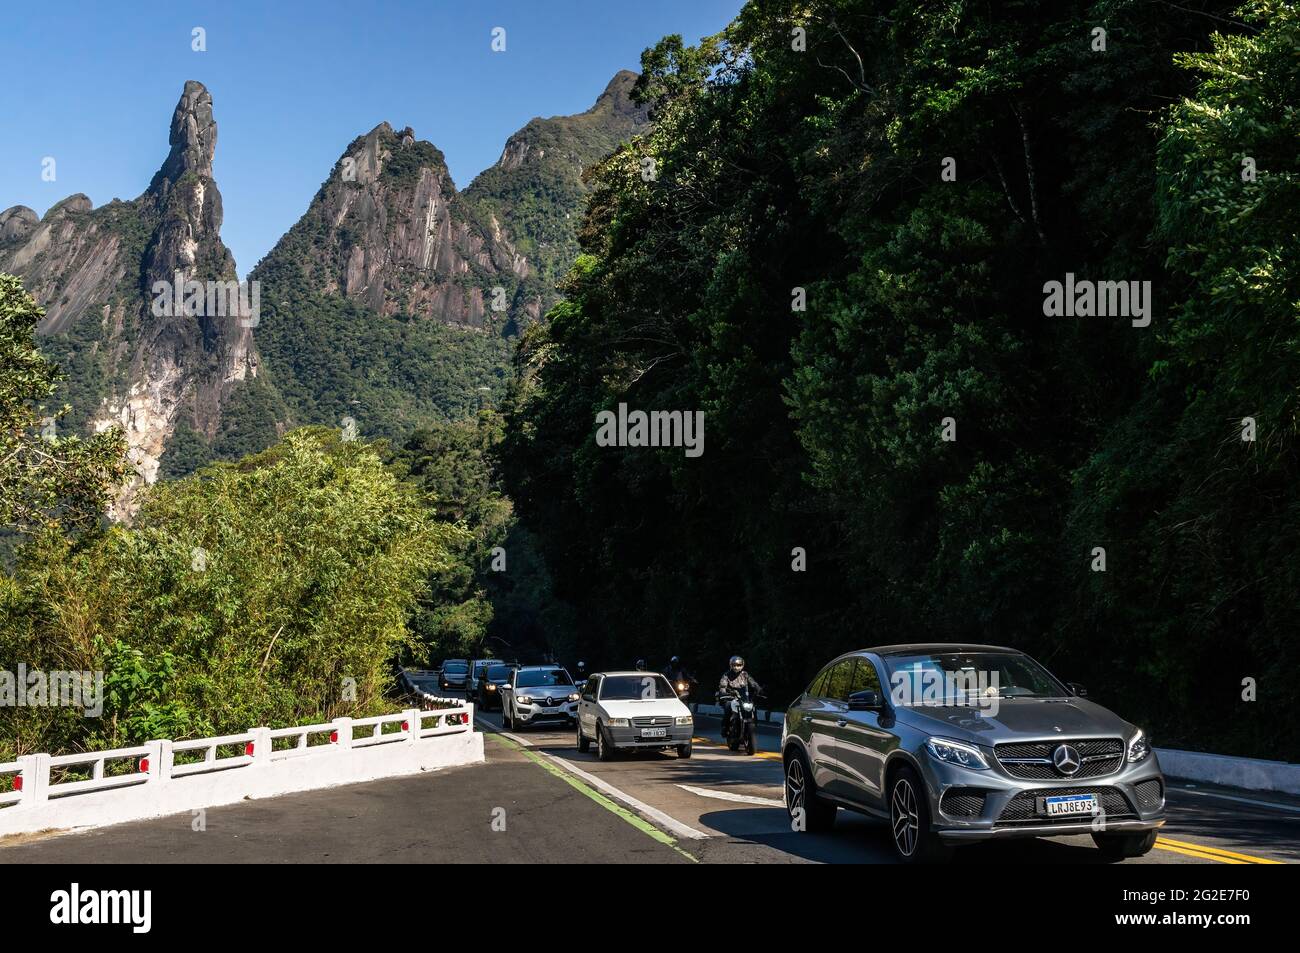 Cars climbing the narrow Rio-Teresopolis highway nearby Soberbo viewing spot with God's Finger and Cabeca de Peixe (Fish Head) peaks at far back. Stock Photo